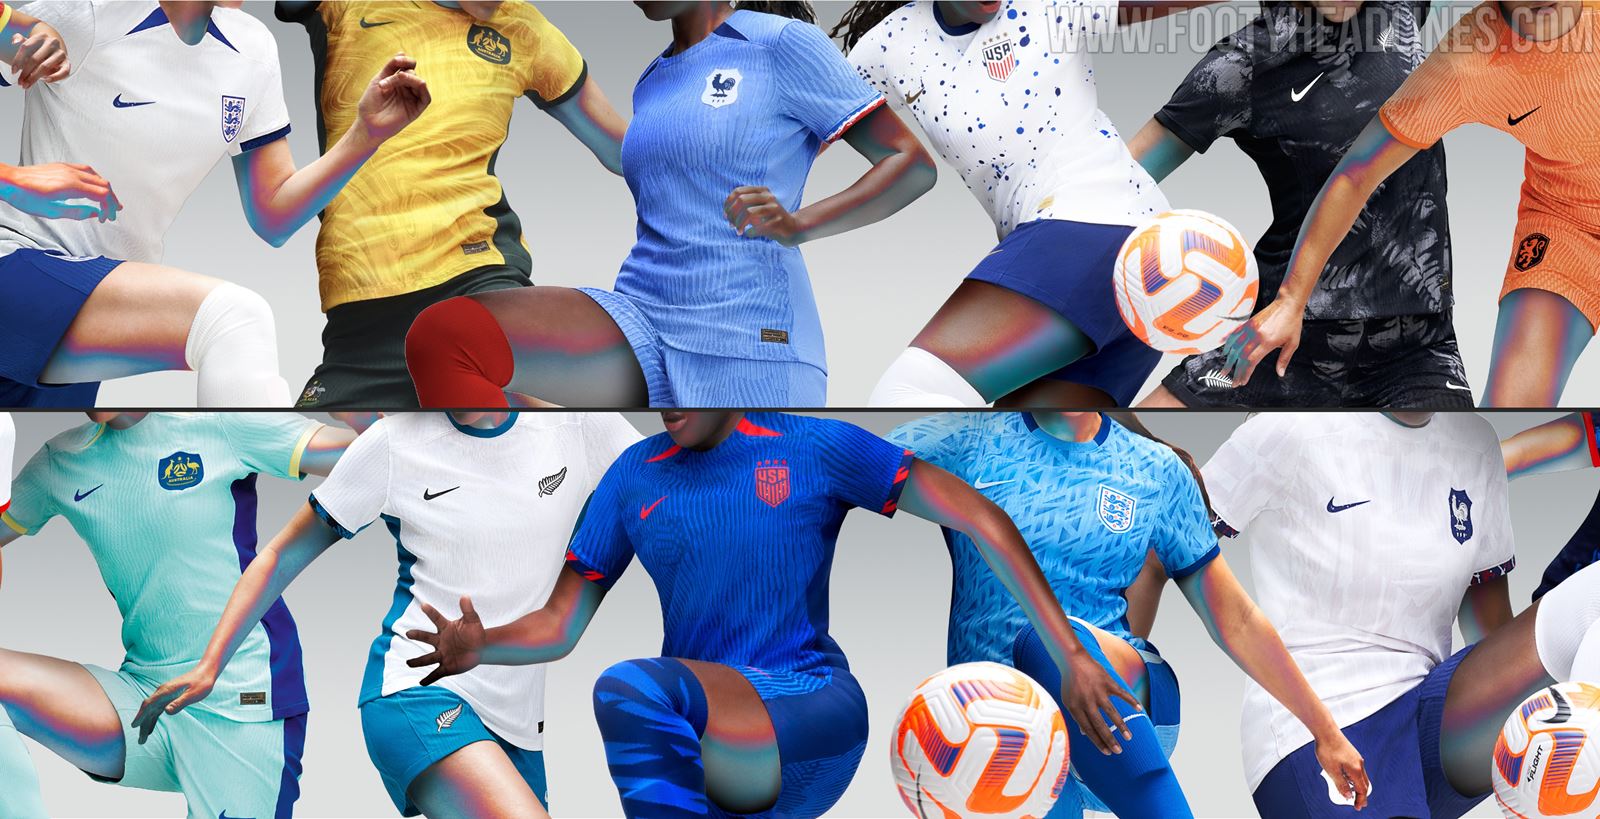 infinito Suradam Post impresionismo All Nike 2023 Women's World Cup Kits Released - Footy Headlines